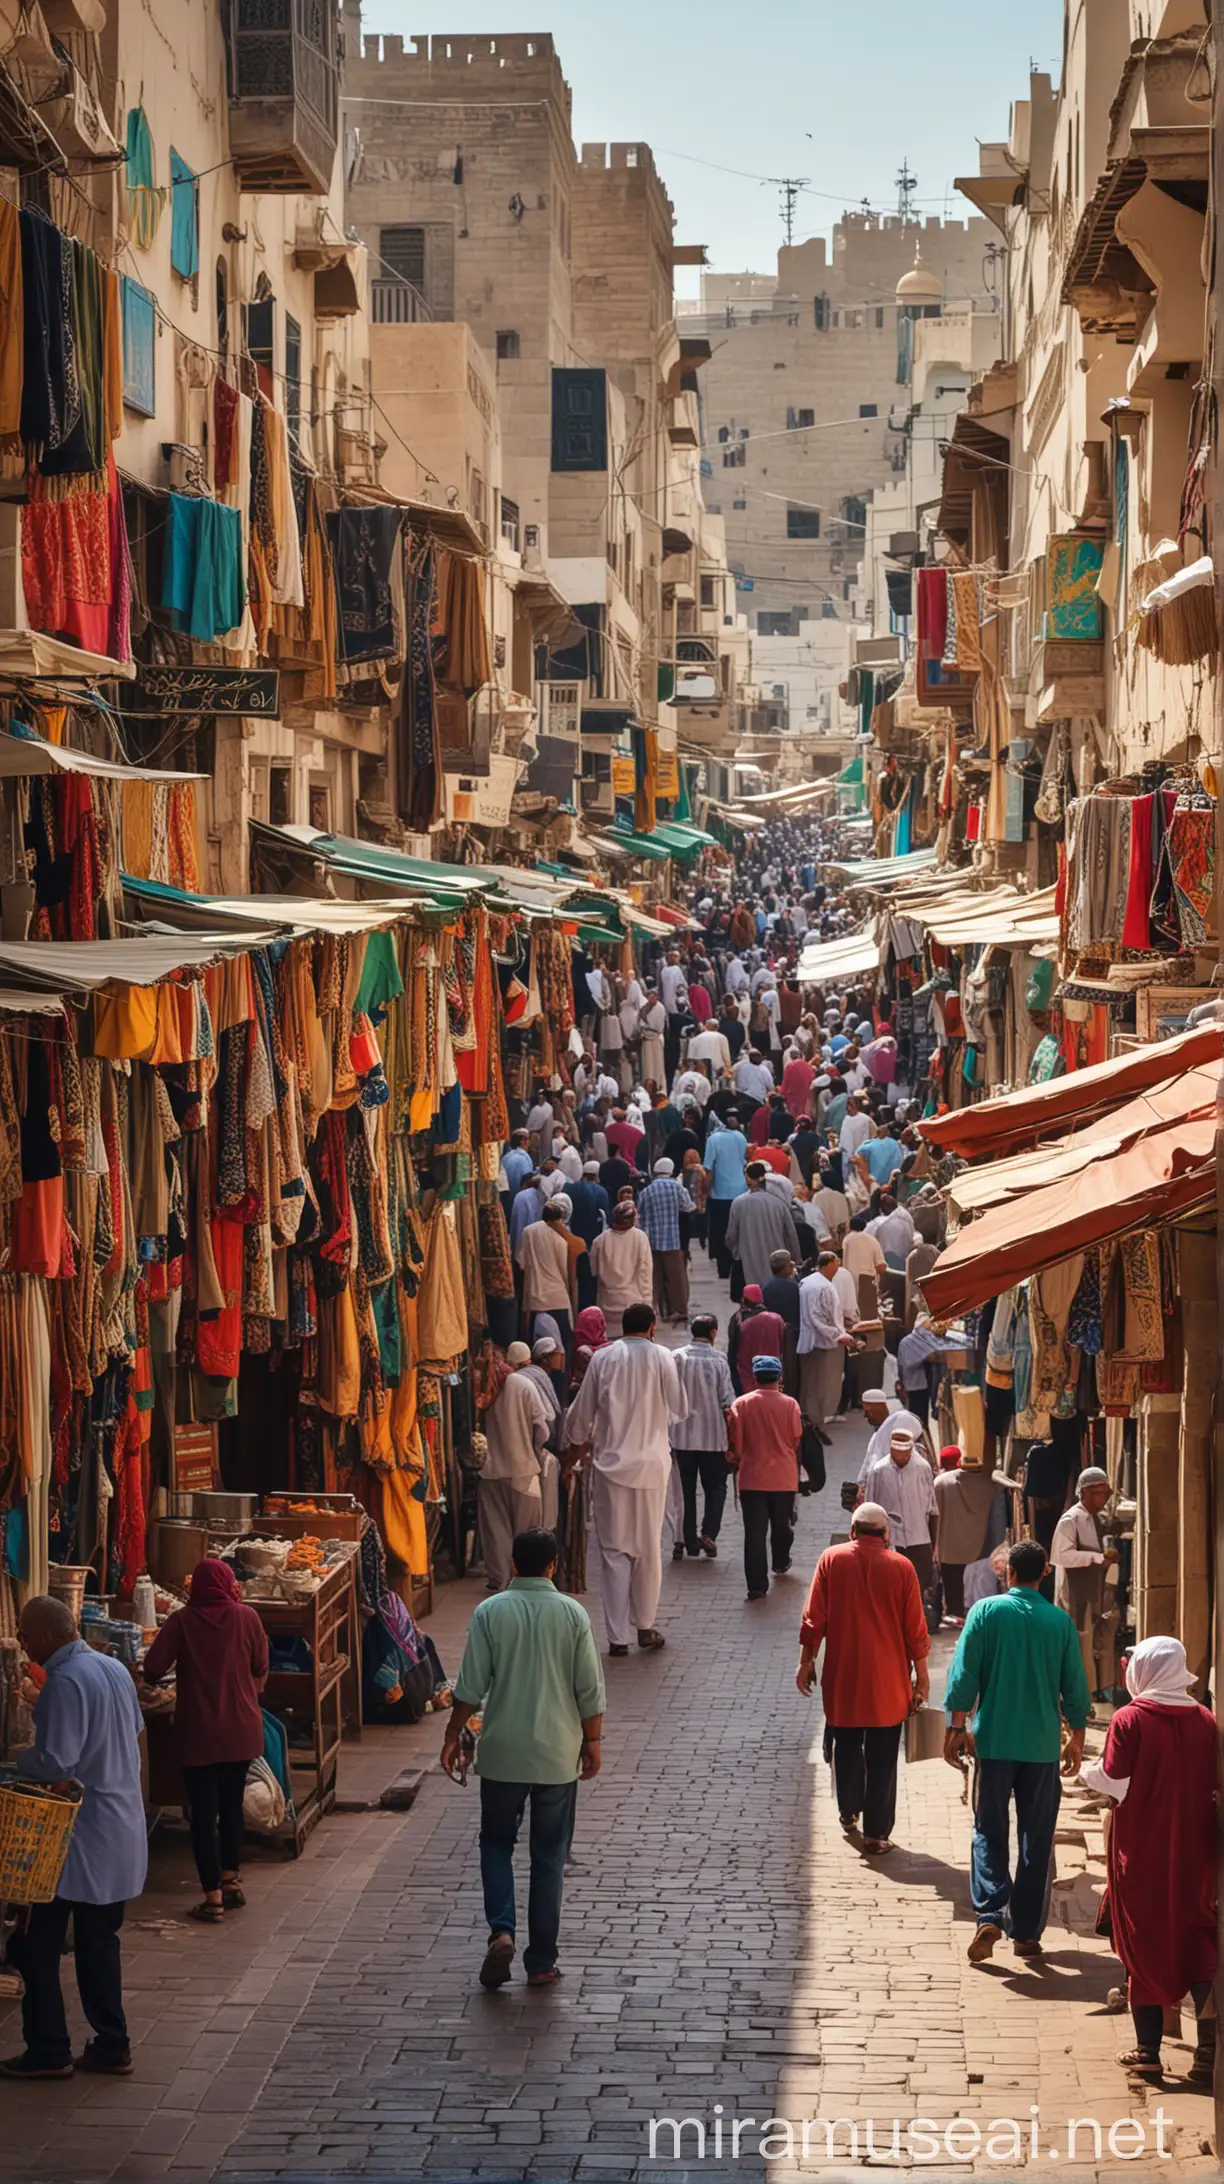 Vibrant Marketplace Scene Bustling Streets of Medina with Colorful Stalls and Crowds